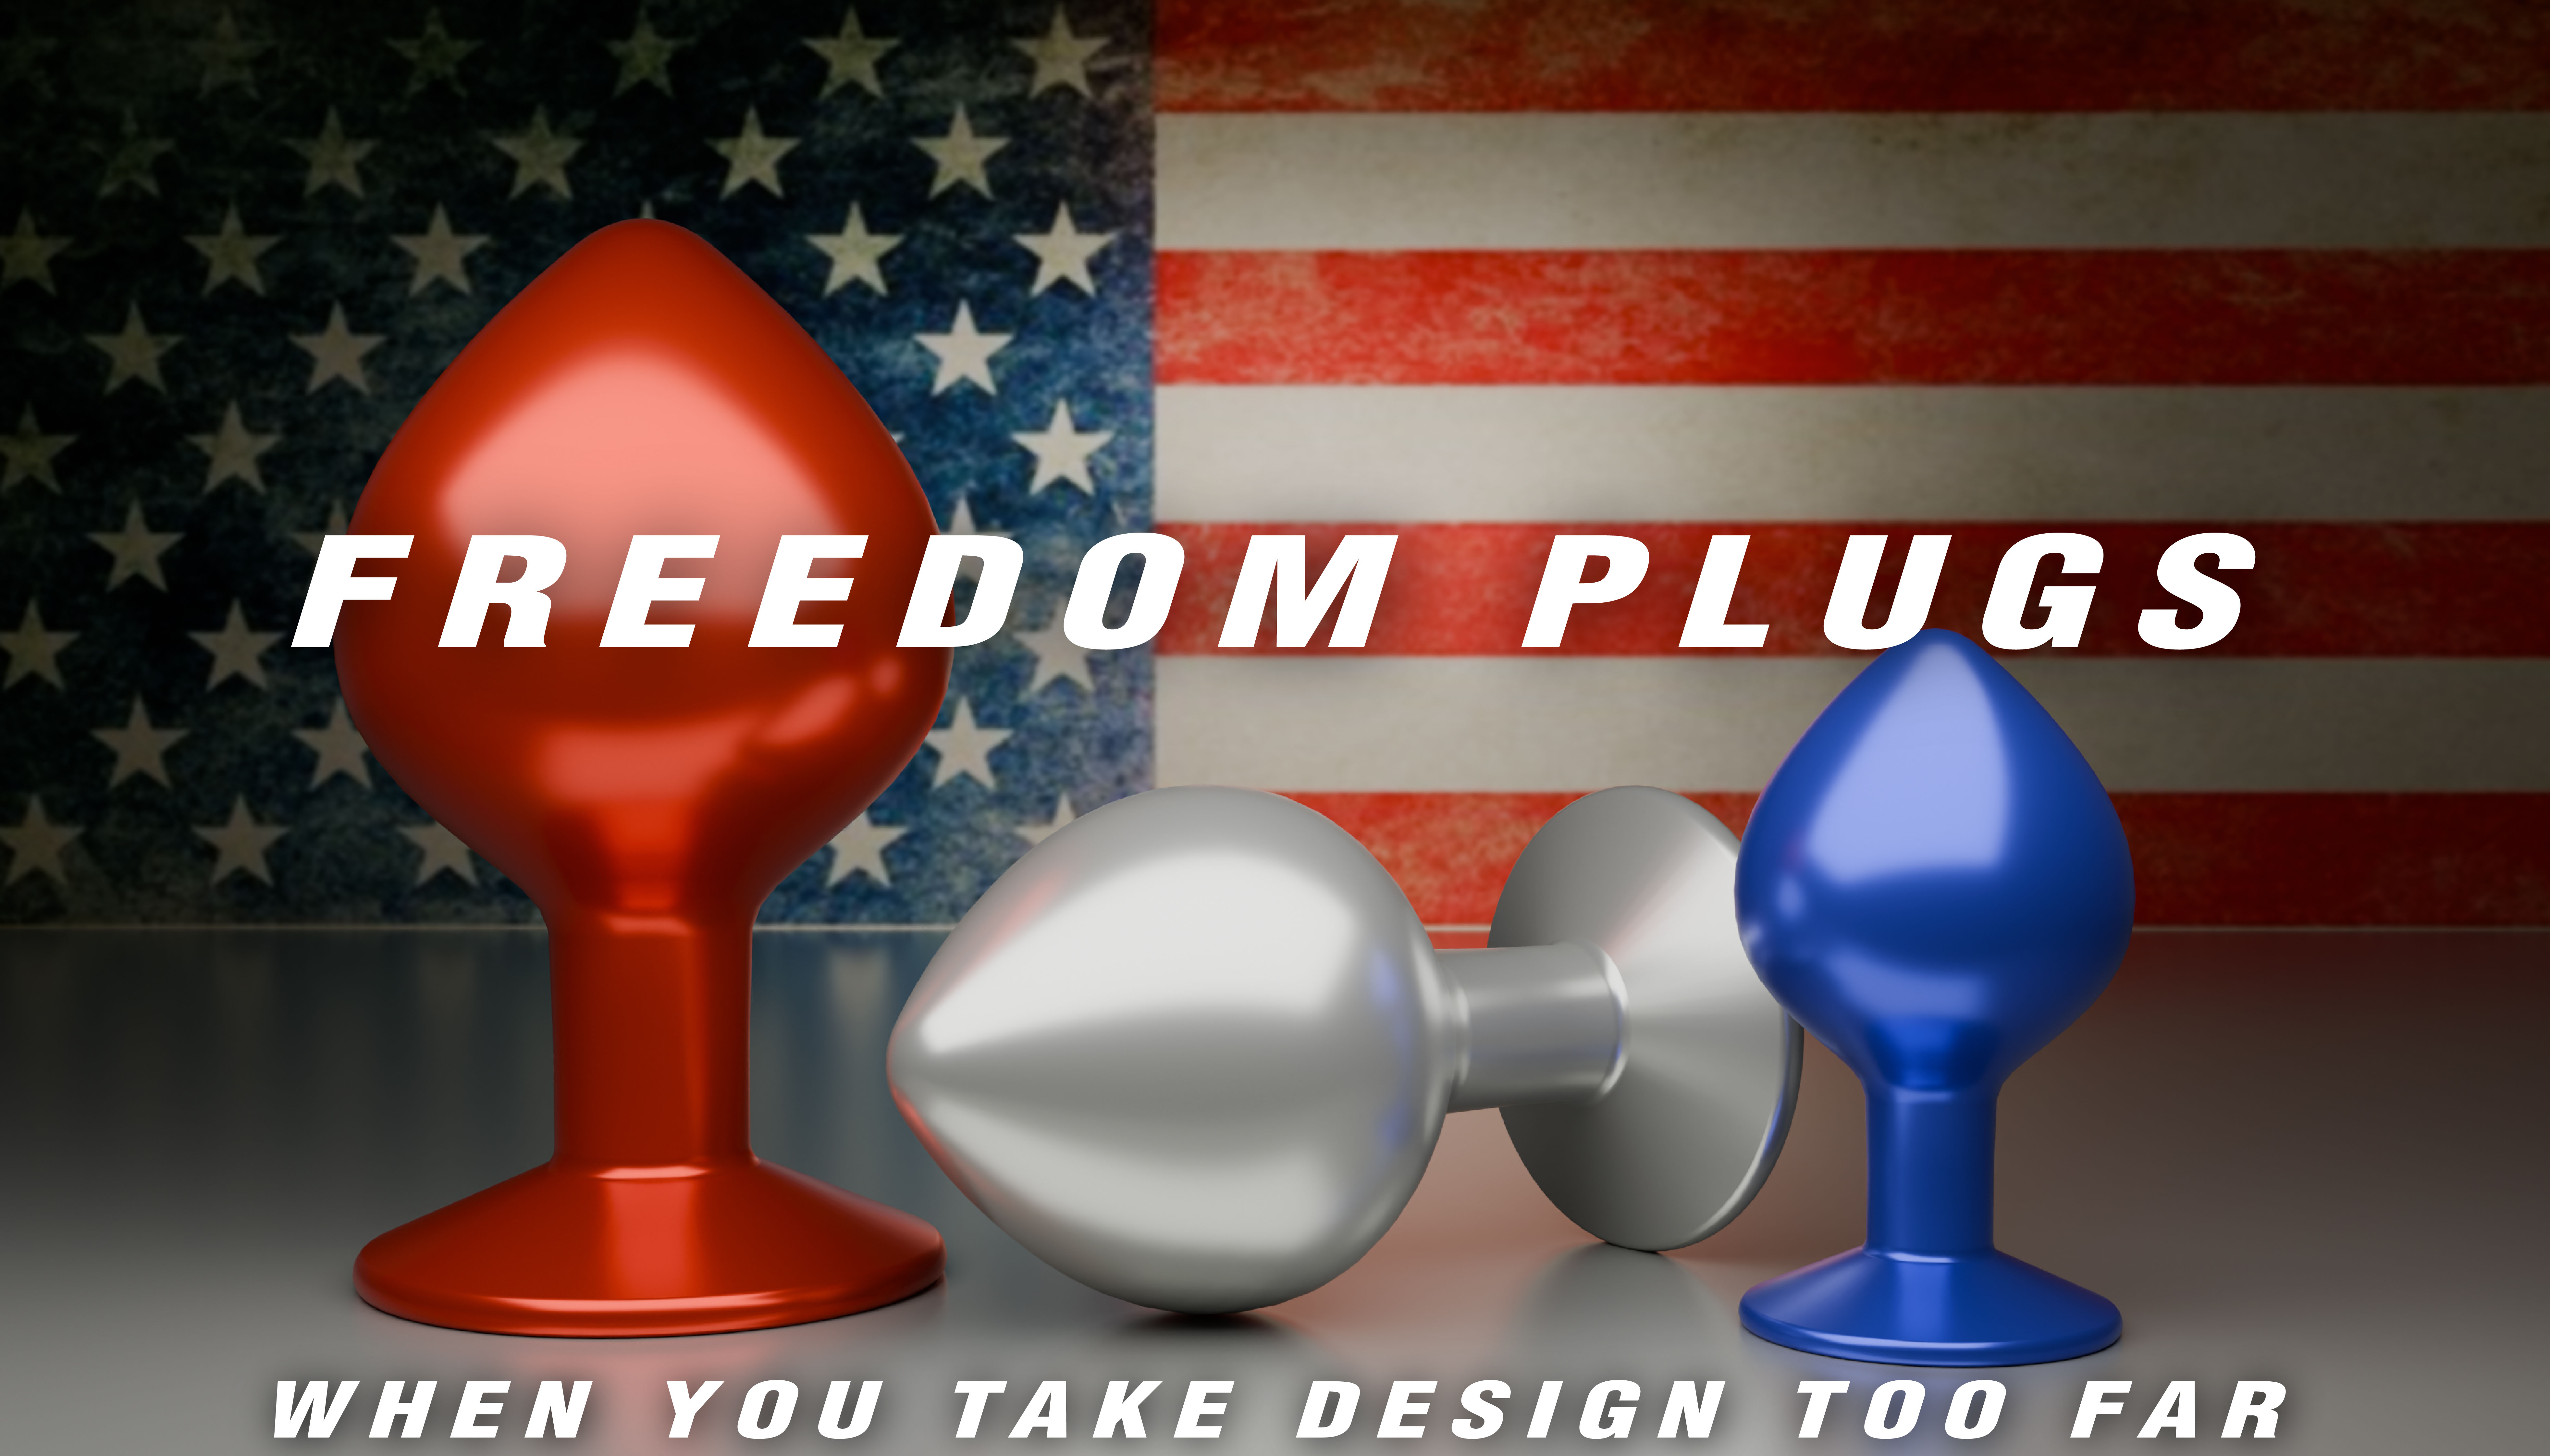 Freedom Plugs Blender Render with text overlay